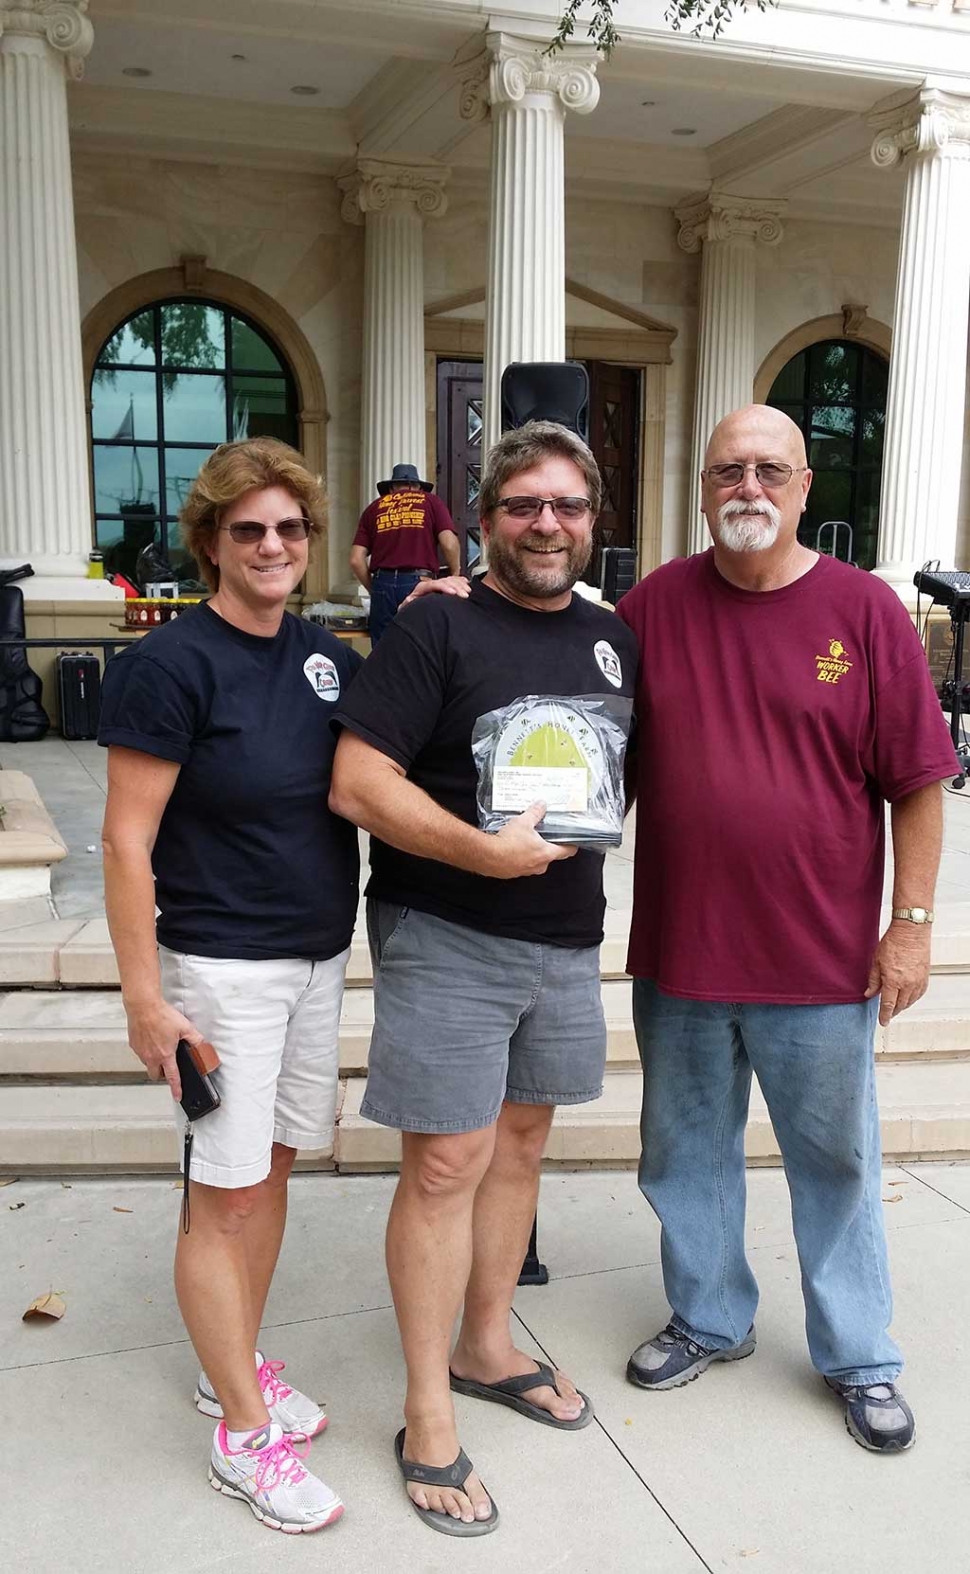 The 5th Annual California Honey Harvest Festival & BBQ Championship was held at Fillmore Central Park on June 11, 2016. In the BBQ Championship. Team “Blazed N’ Glazed”, Josh Weis and his wife, took First Place in pork butt with a near perfect score of 178.32 (180 is perfect). The Weises are from Simi Valley and this was their first win ever. This year’s championship had 27 pit masters, with 18 being Grand Champions at various contests around California. So this is serious bragging rights for the Weises. Presenting the award is Roger Campbell, right.